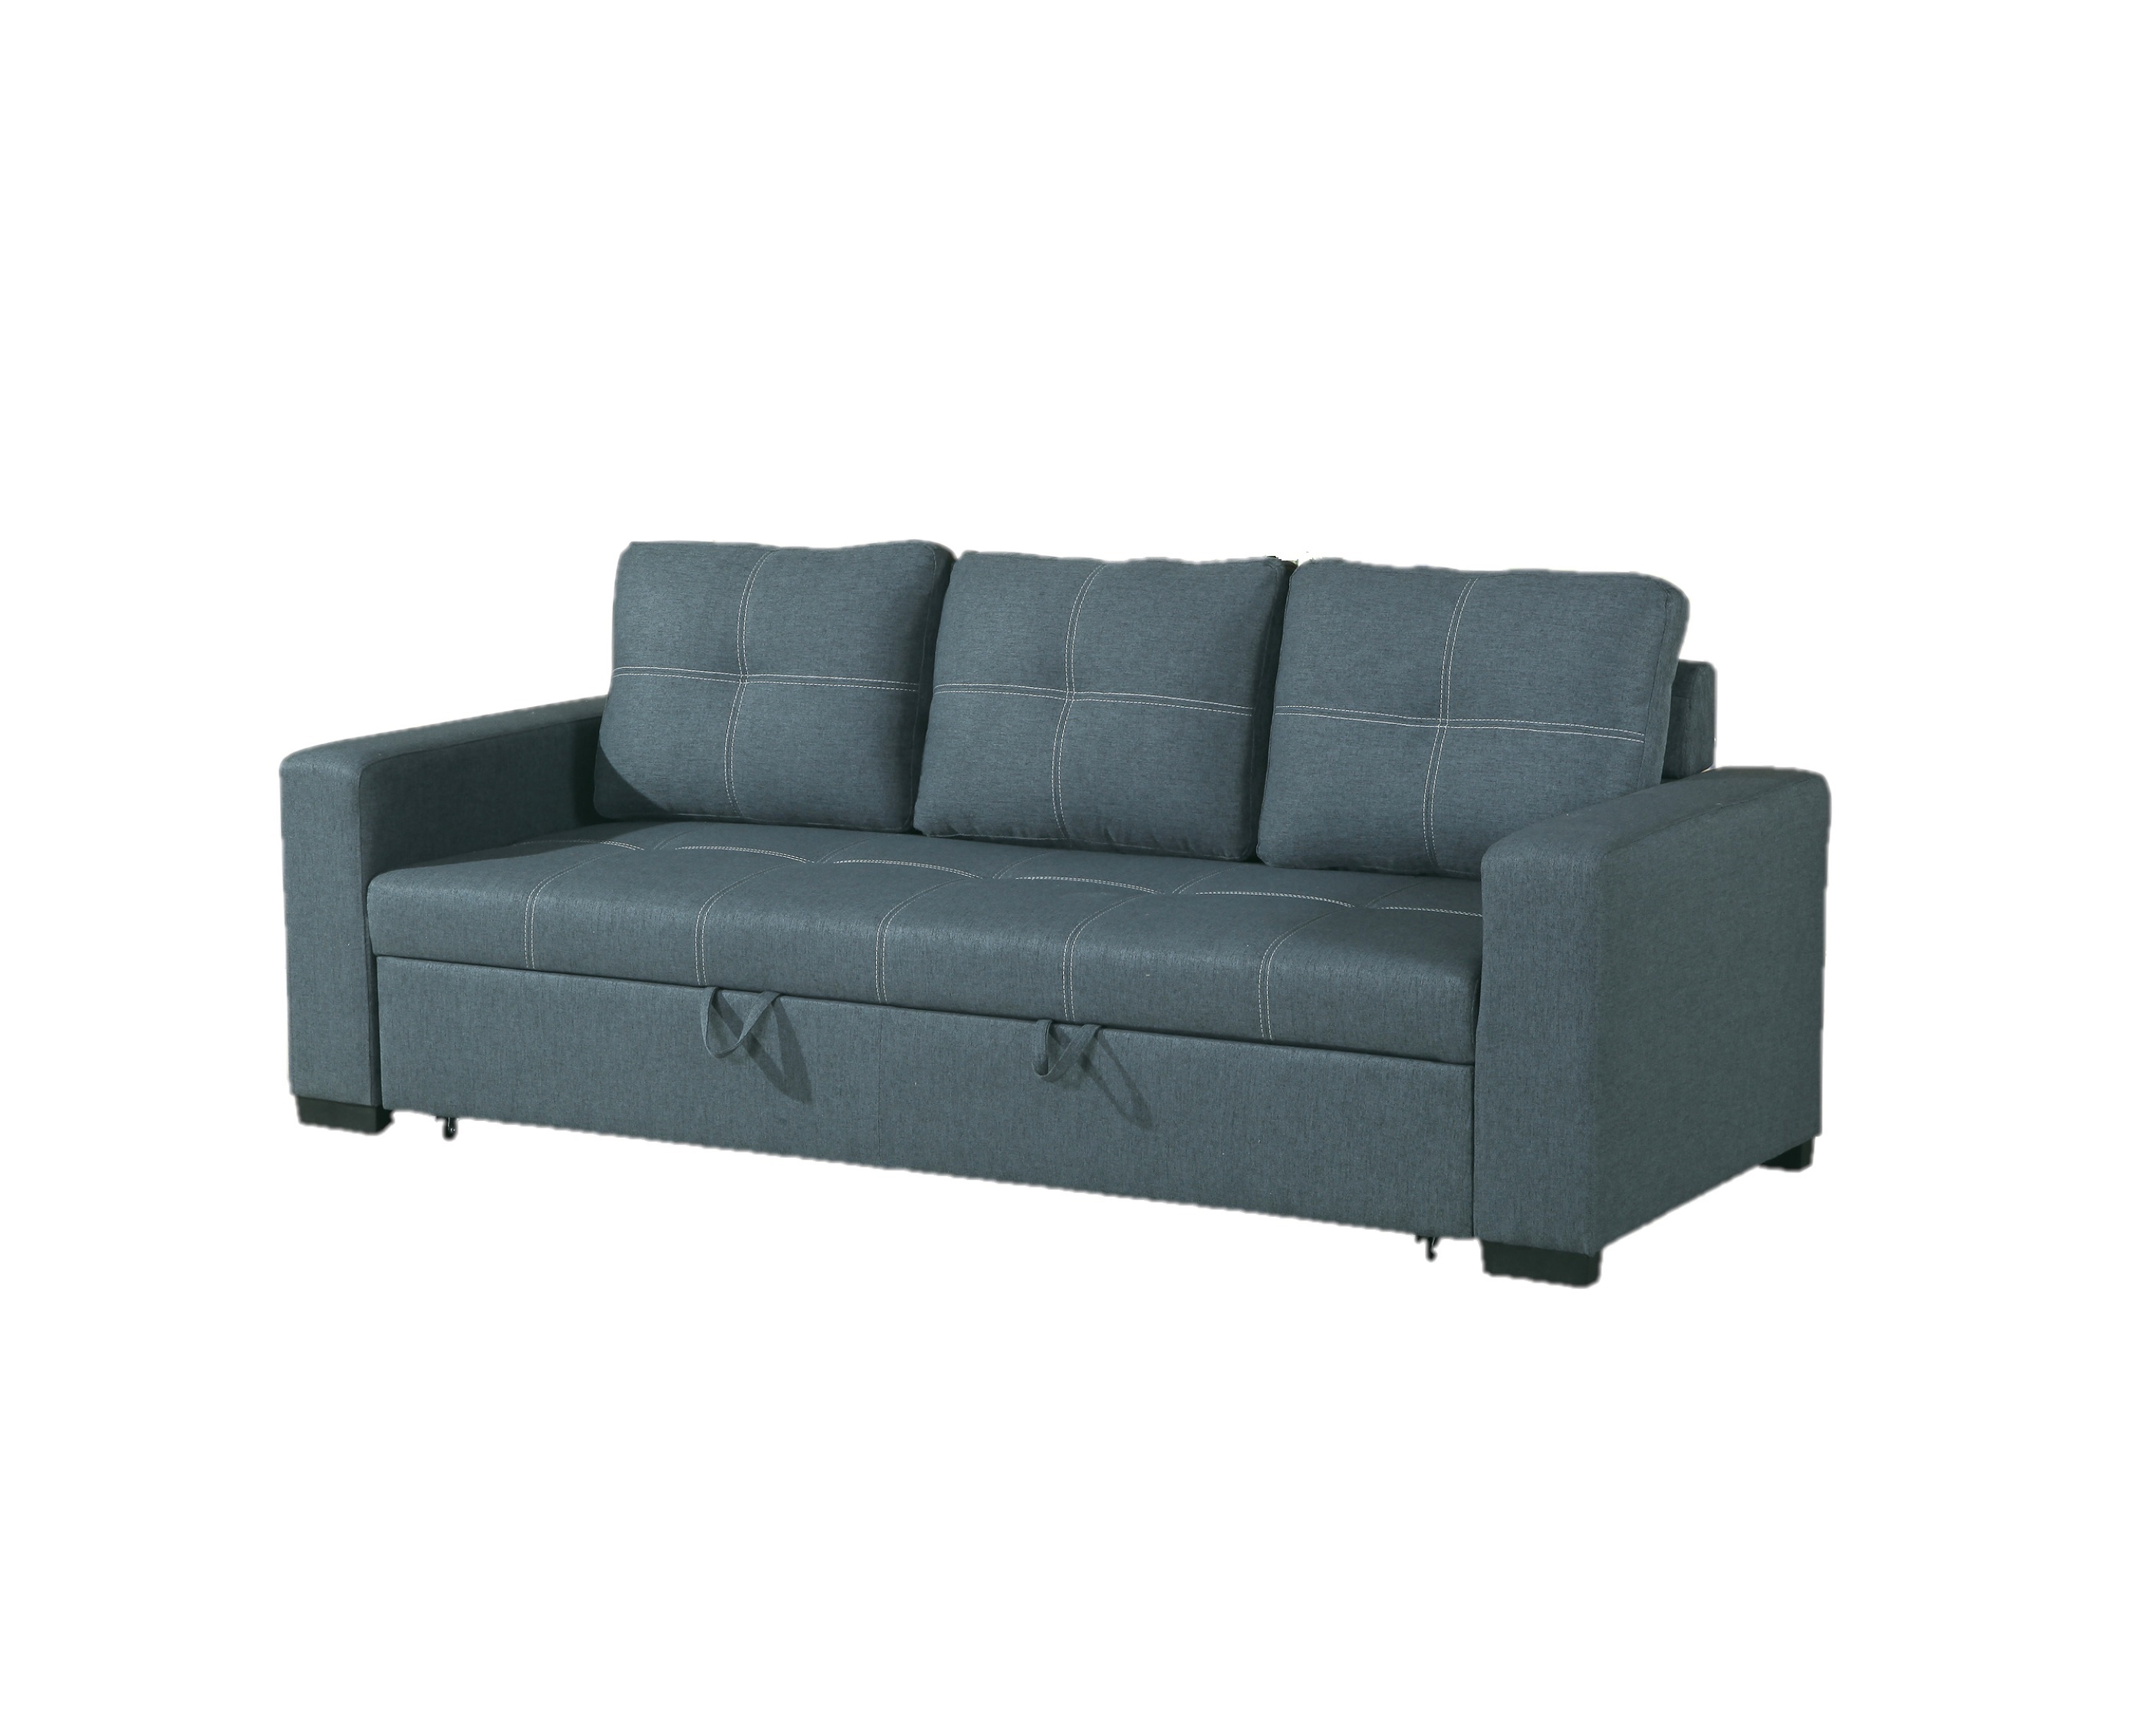 Convertible Sofa Bed Bobkona Living Room Sofa w Pull out Bed Accent Stitching Comfort Couch Blue Grey Polyfiber - image 3 of 5